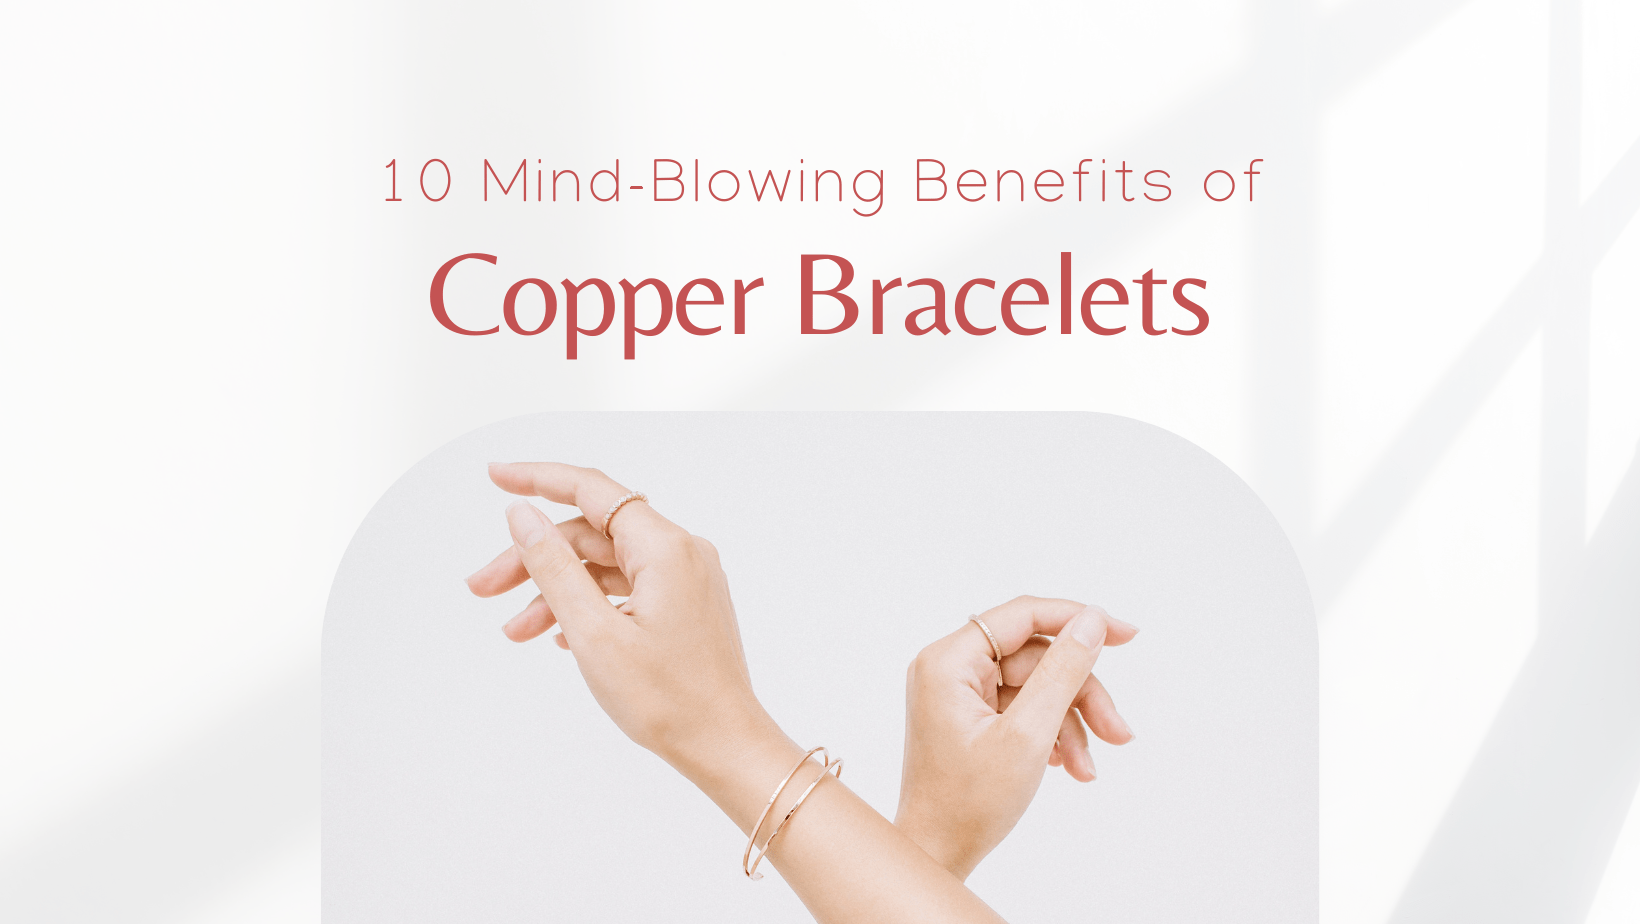 10 Mind-Blowing Benefits of Copper